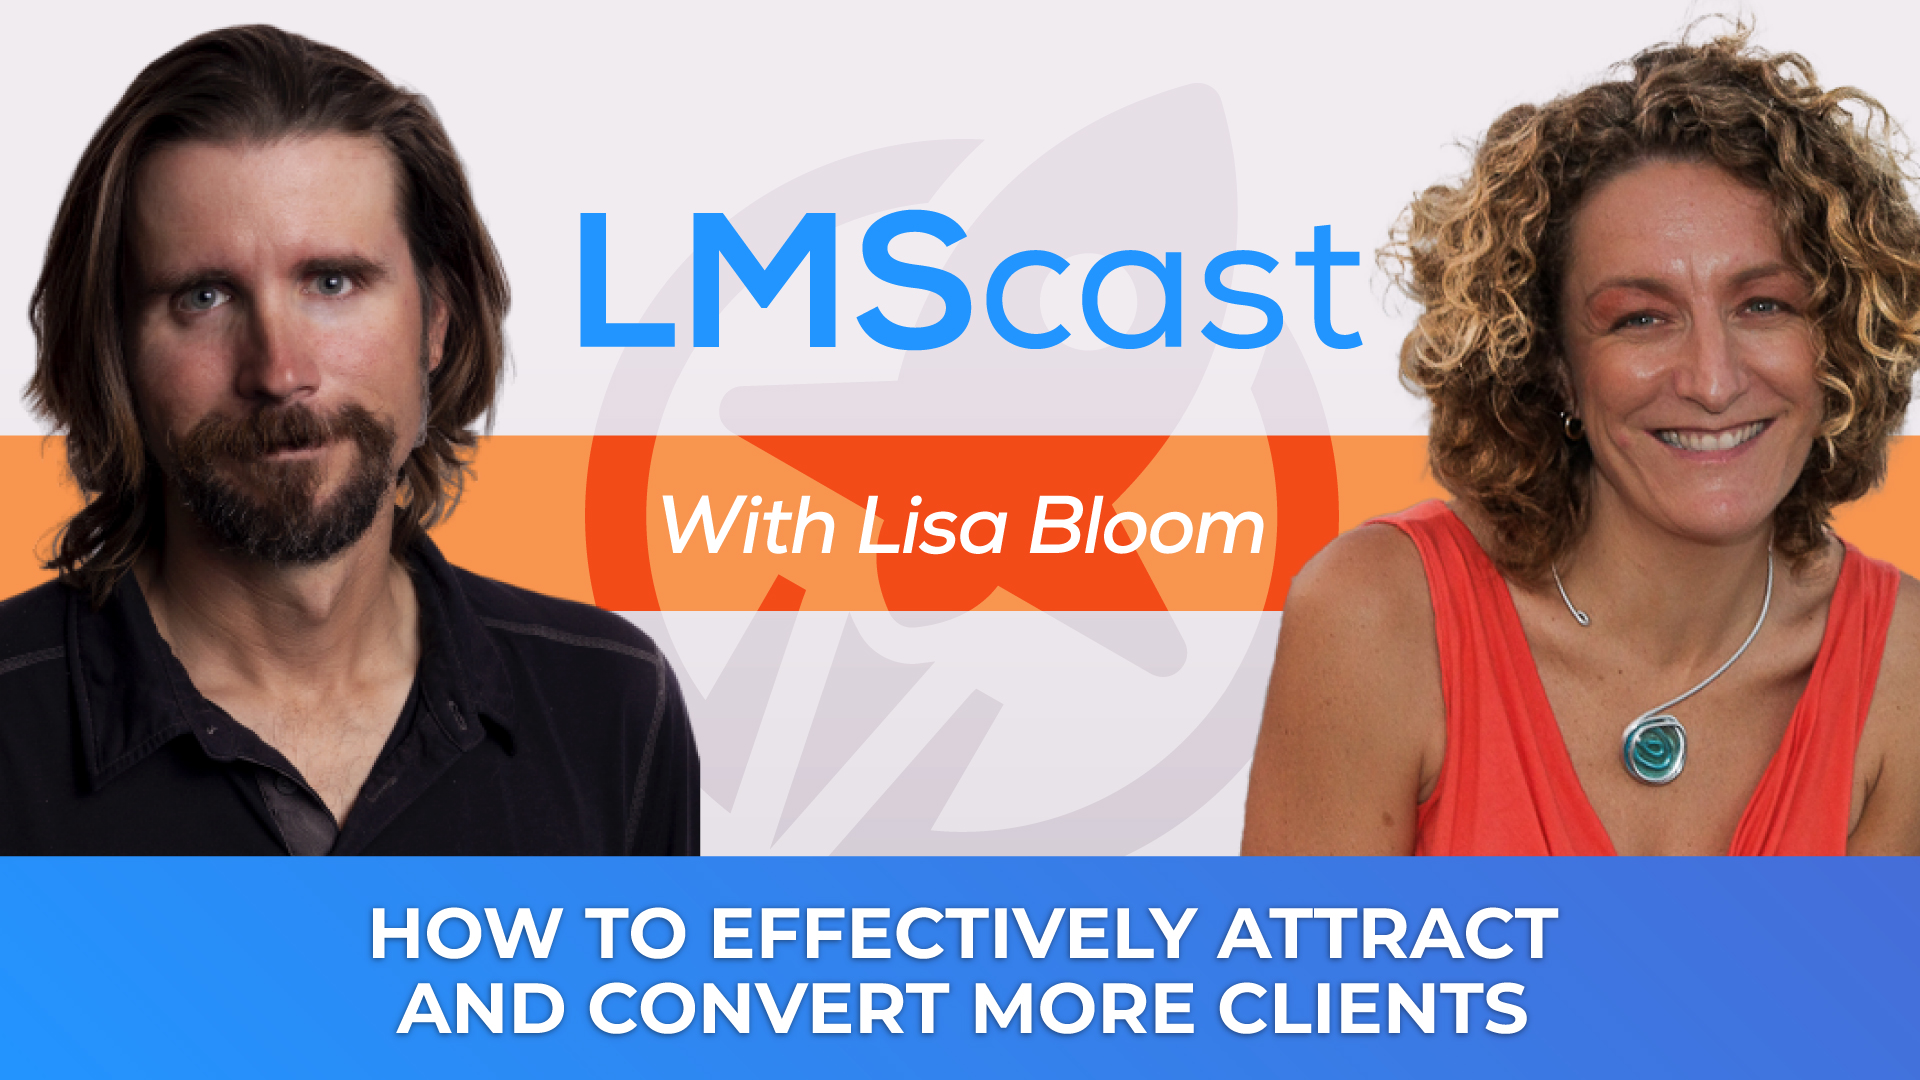 How to Attract and Convert More Clients through Story with Lisa Bloom